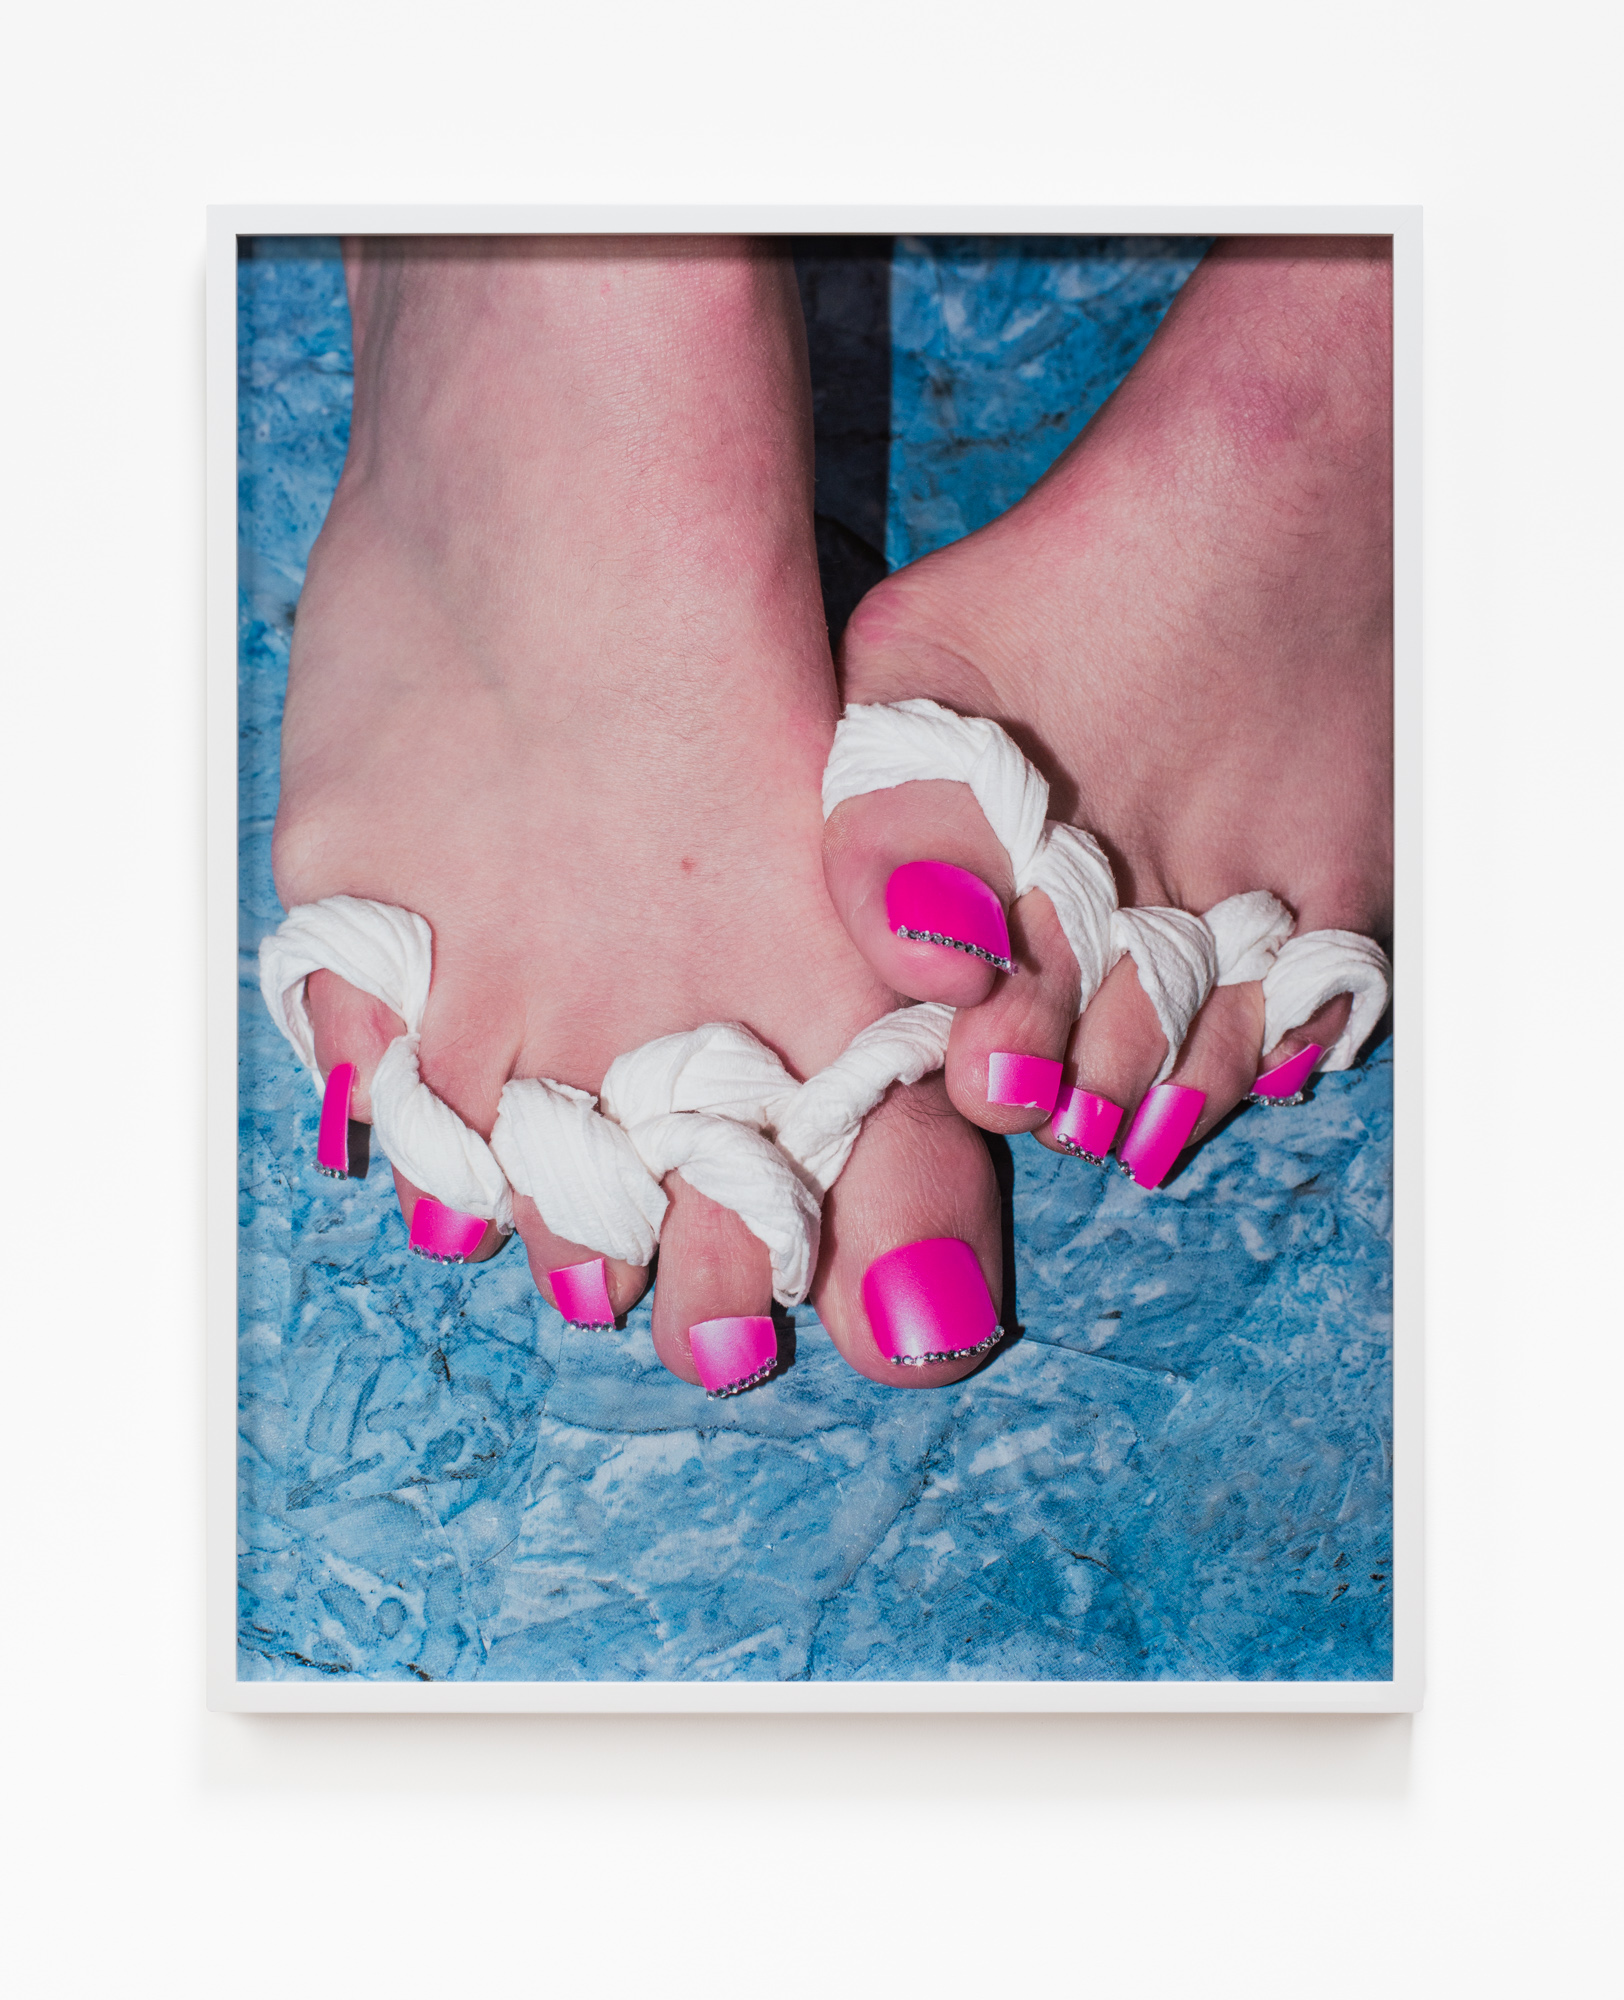 Dylan Beckman, Pedicure, 2019, Archival inkjet print, 20 x 25 inches, Edition of 4 + AP 1